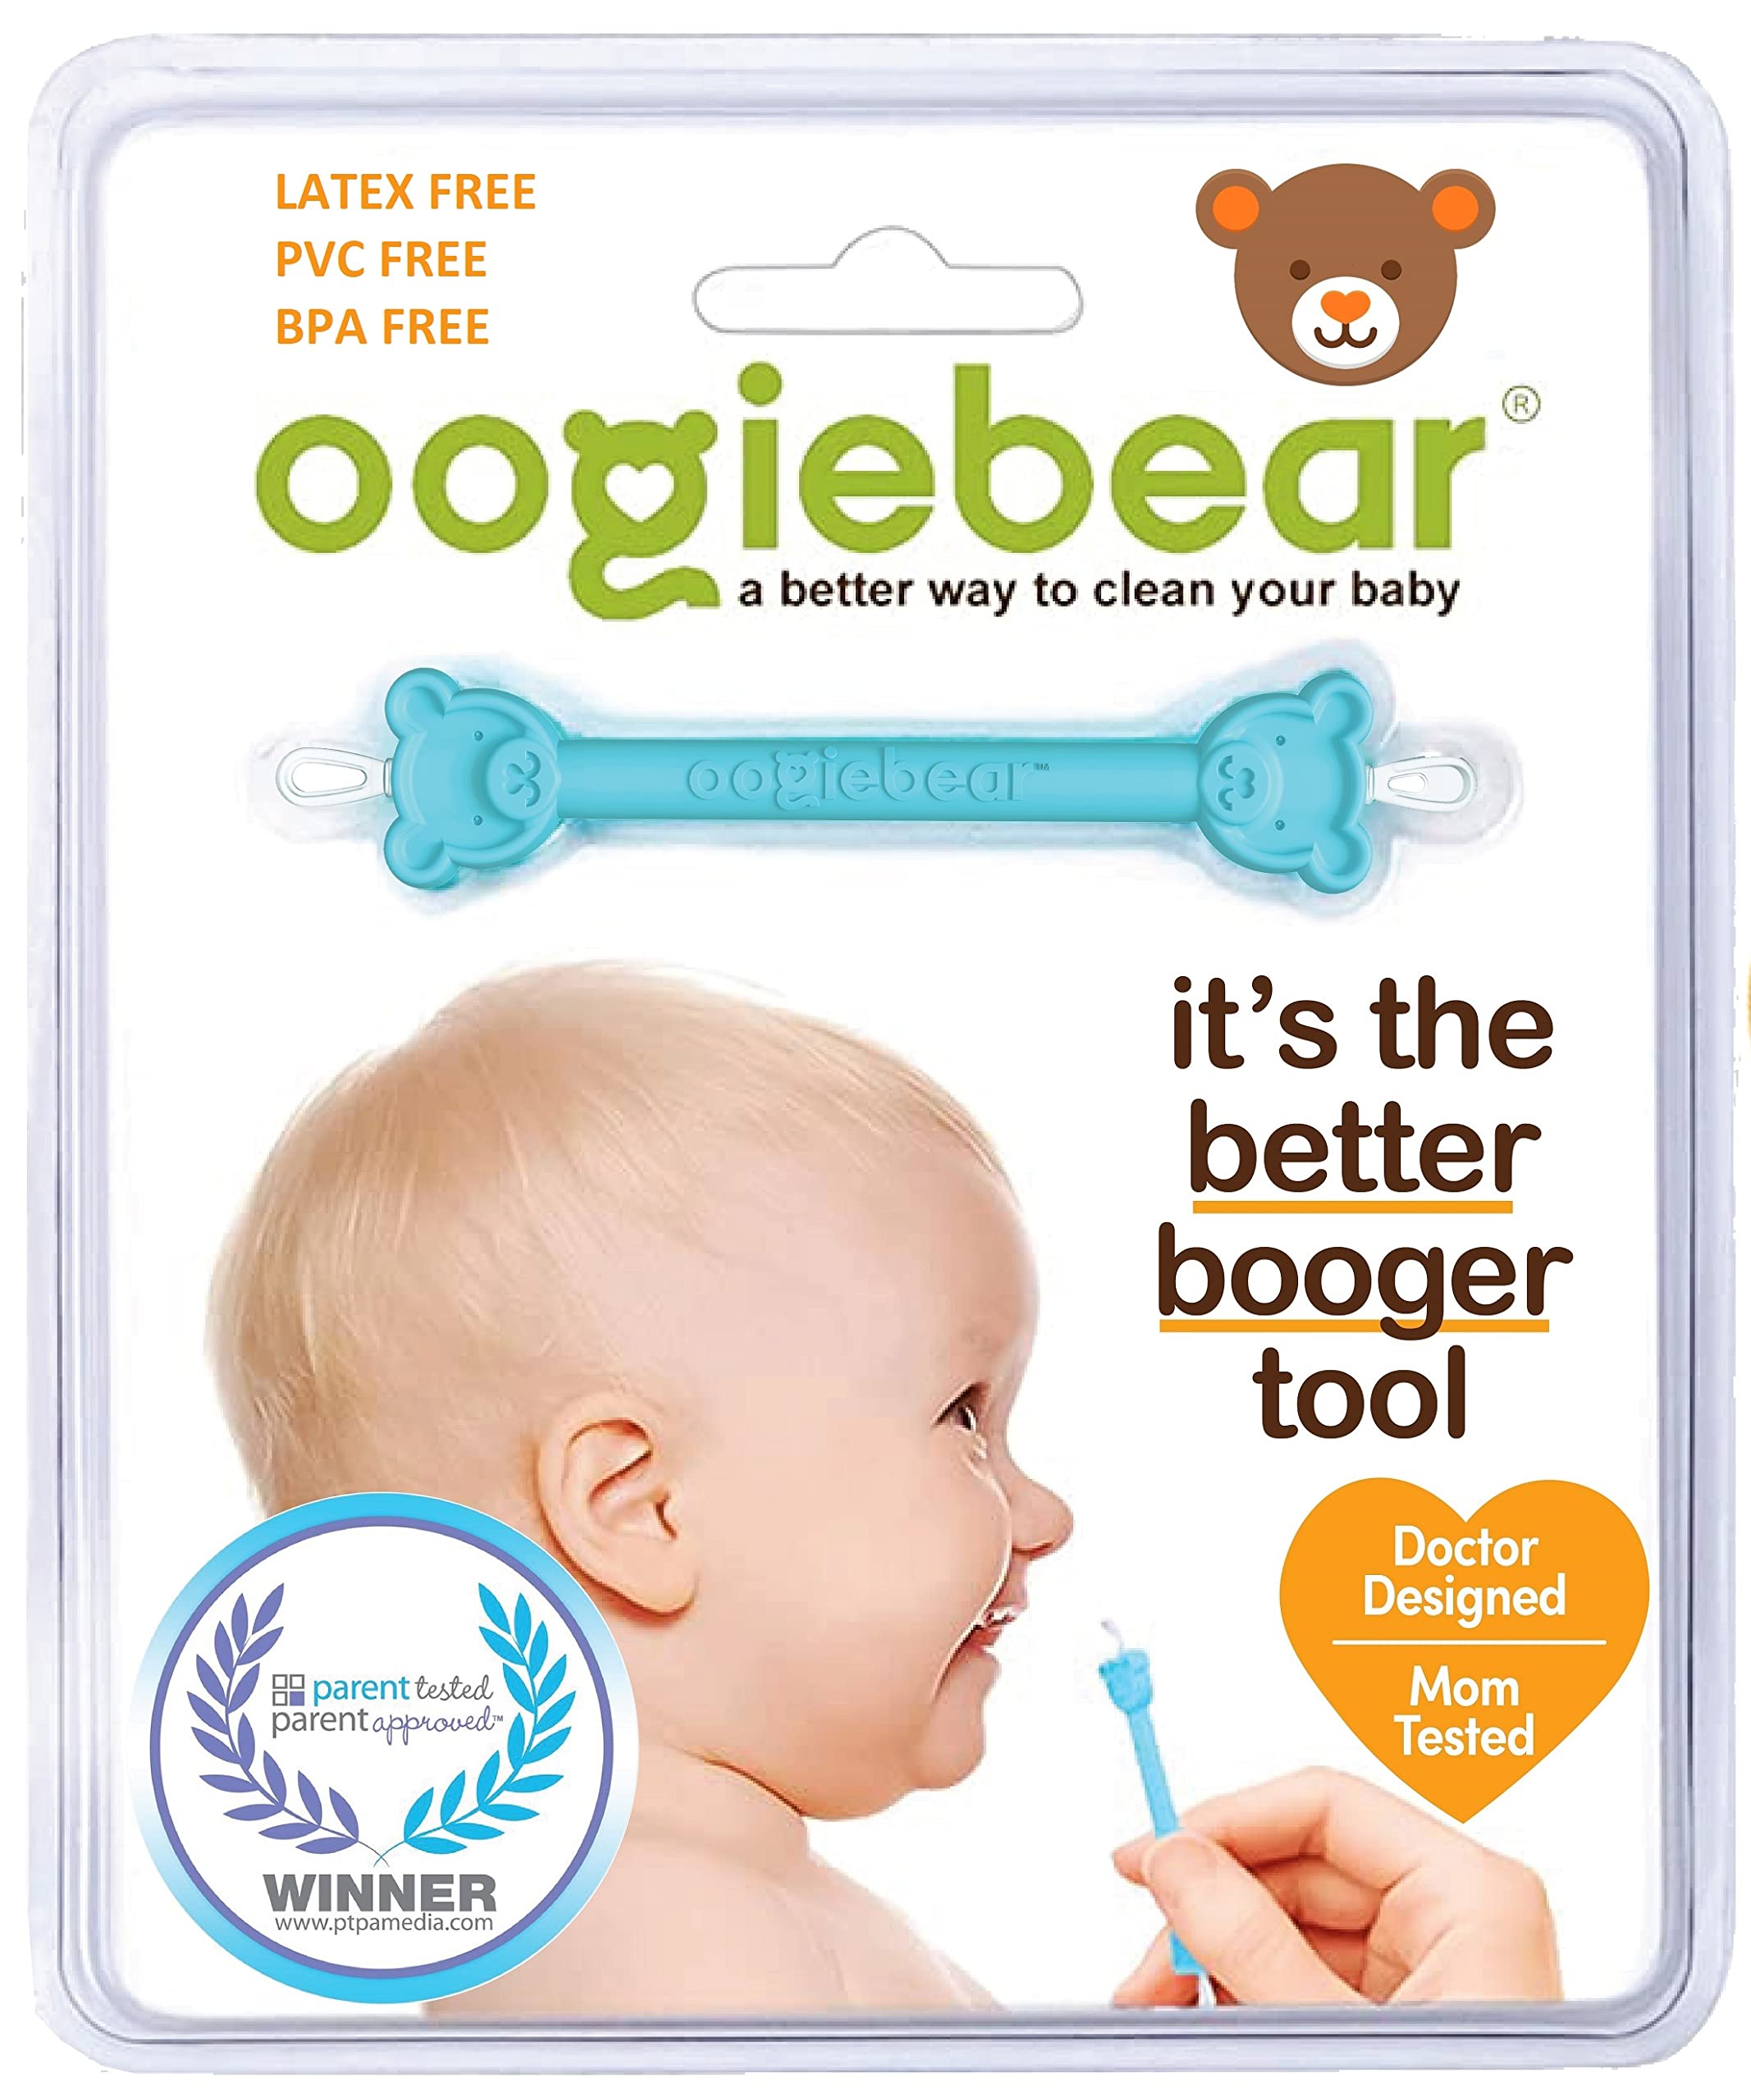 oogiebear - Nose and Ear Gadget. Safe, Easy Nasal Booger and Ear Cleaner  for Newborns and Infants. Dual Earwax and Snot Remover - 2 Pack with case 